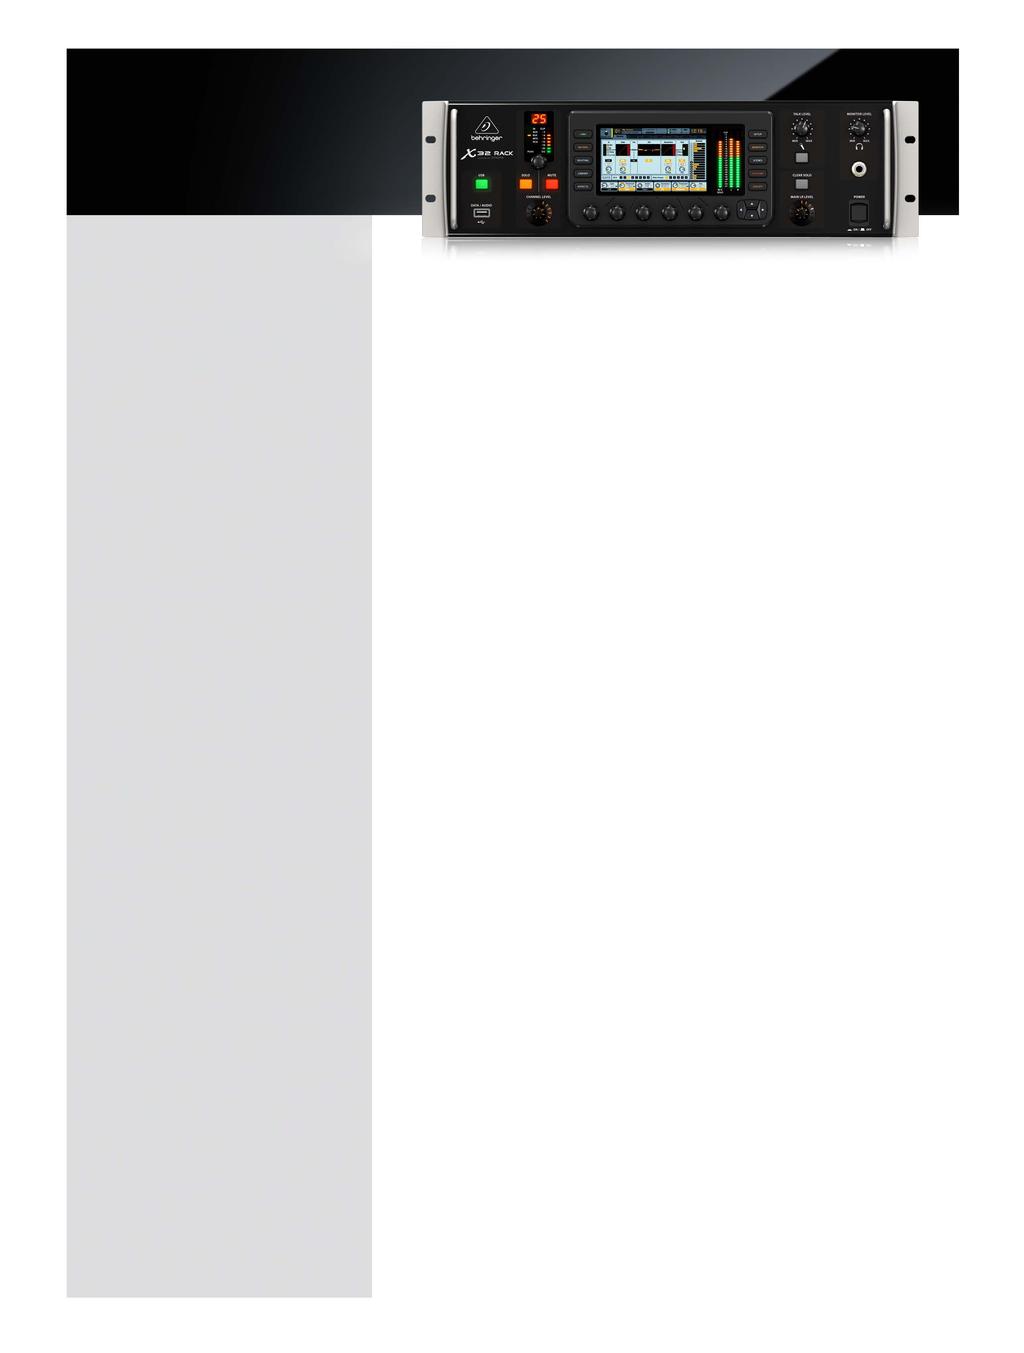 Digital Mixers 40-, 25-Bus Digital Rack Mixer with 16 Programmable MIDAS Preamps, FireWire*/USB Audio Interface and ipad/iphone* Remote Control 40-input channel, 25-bus, 3U rackmountable digital